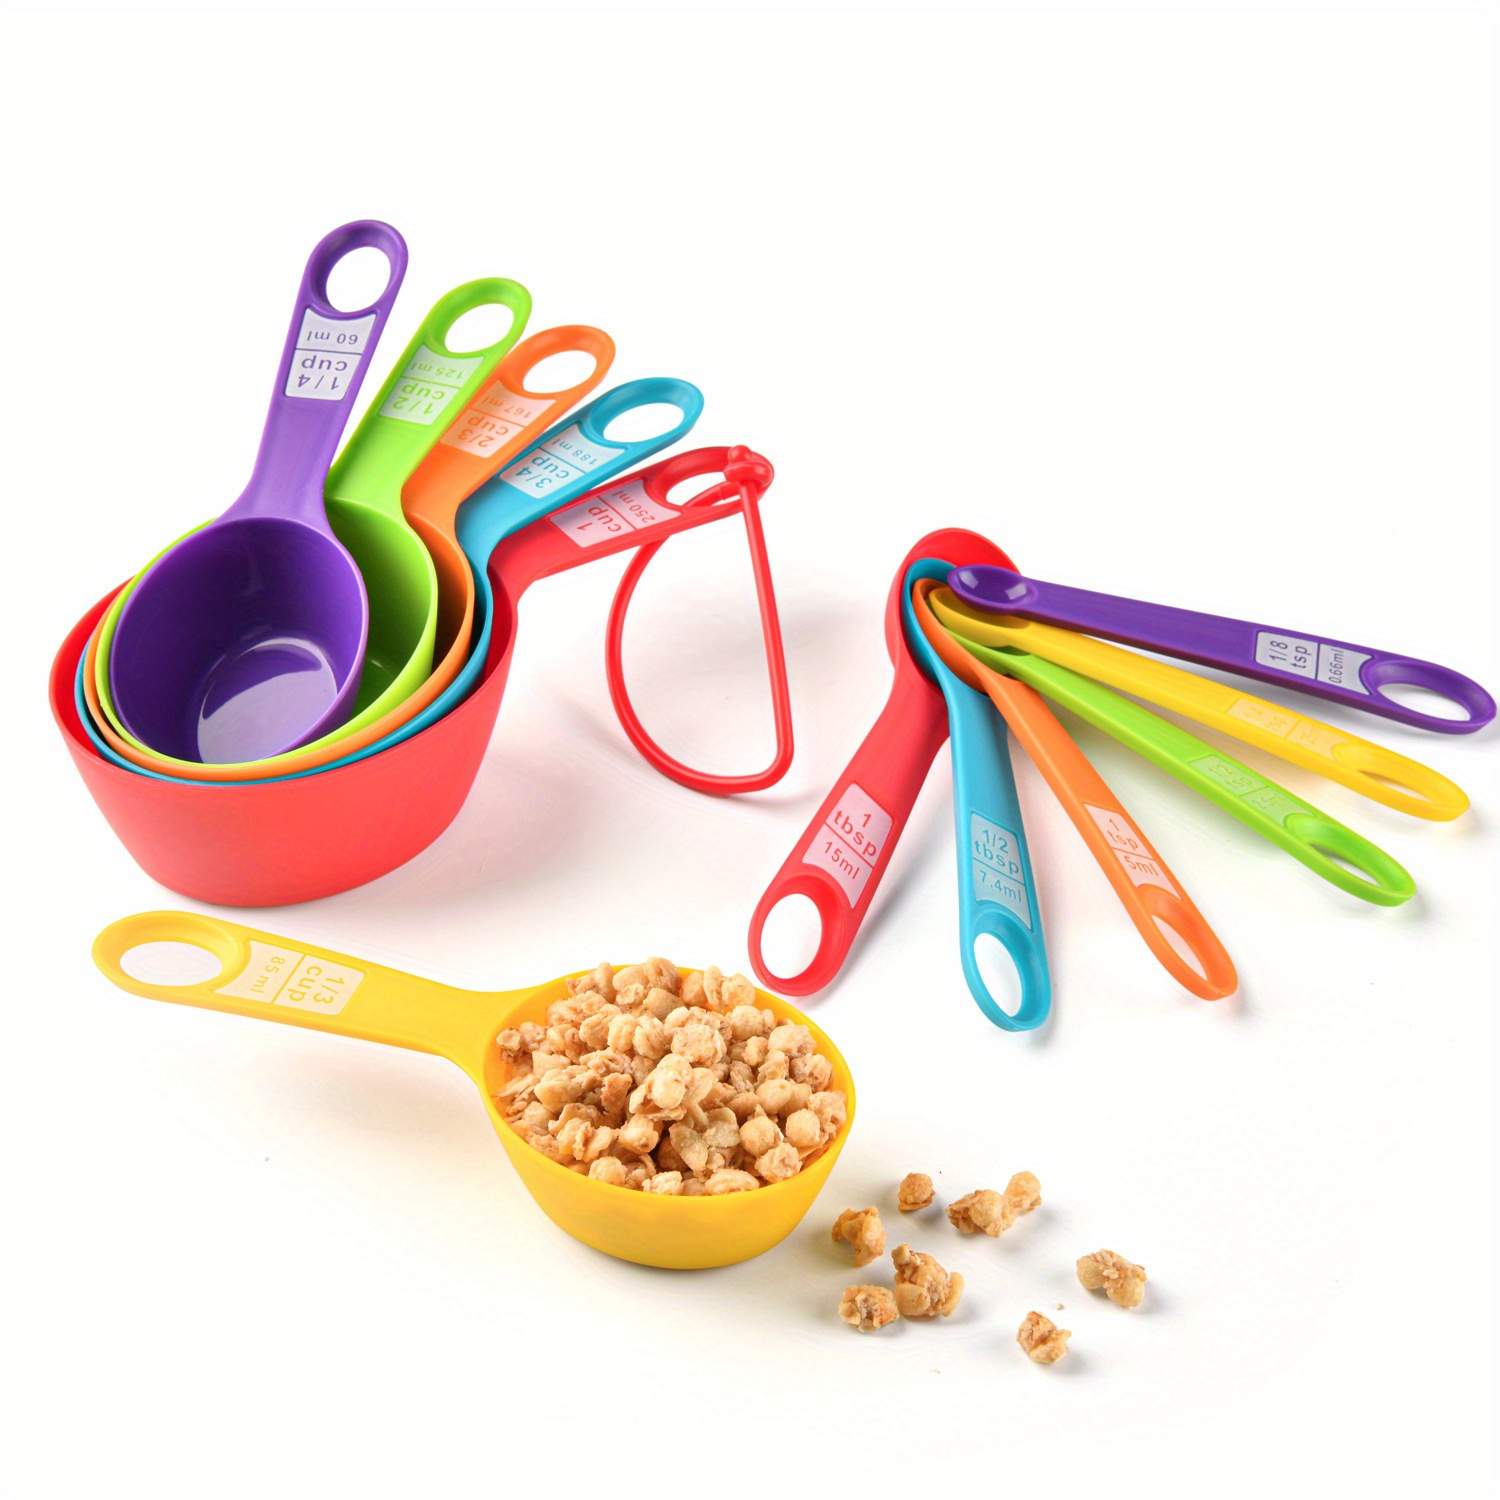 Dropship Multi-Color Measuring Cups And Spoons Set, Measurement Plastic Cup  Spoon Kitchen Cooking Baking Utensils Tools to Sell Online at a Lower Price